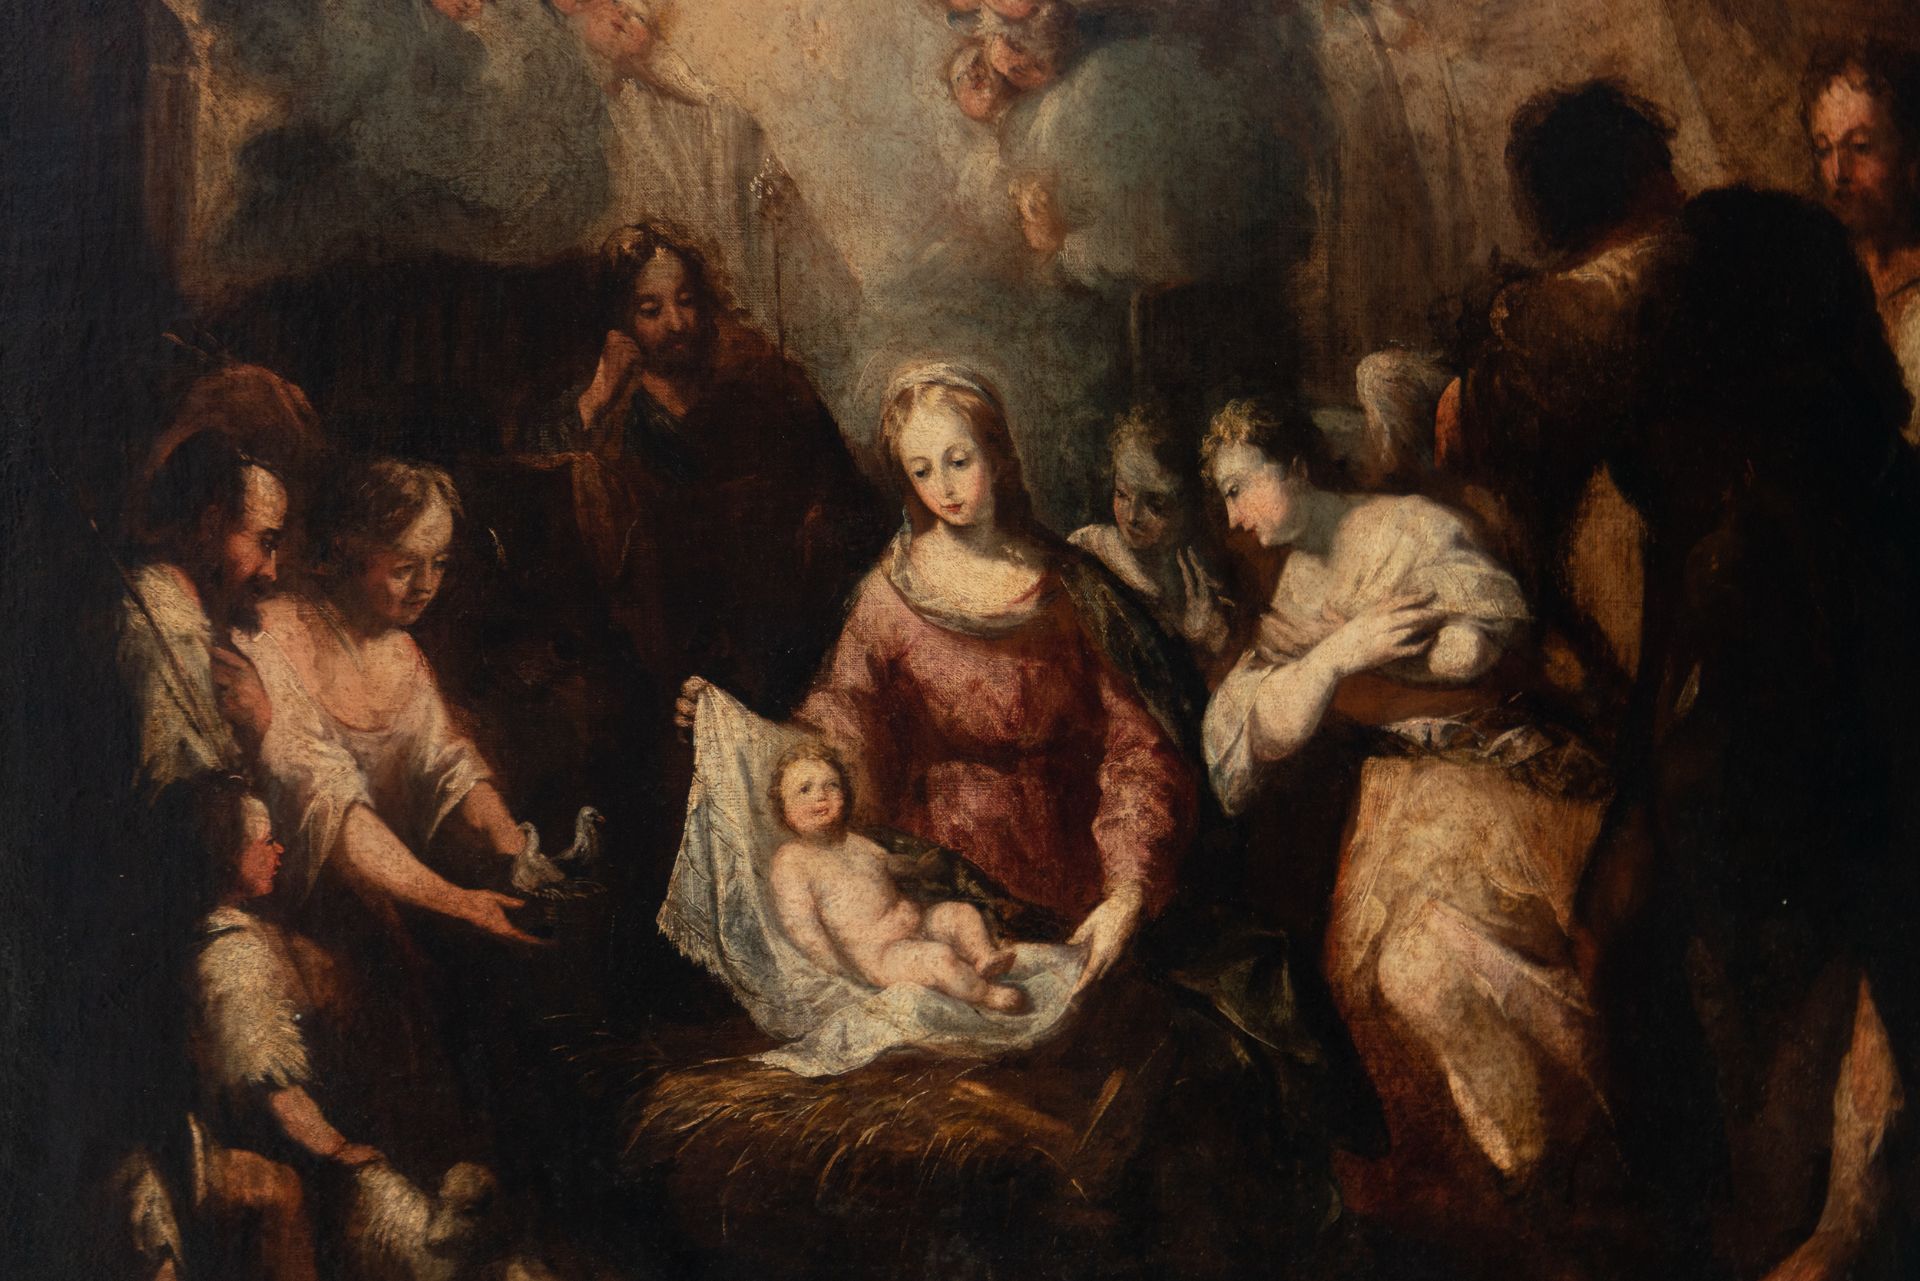 Adoration of the Shepherds, Italian school of the 17th century - Image 2 of 9